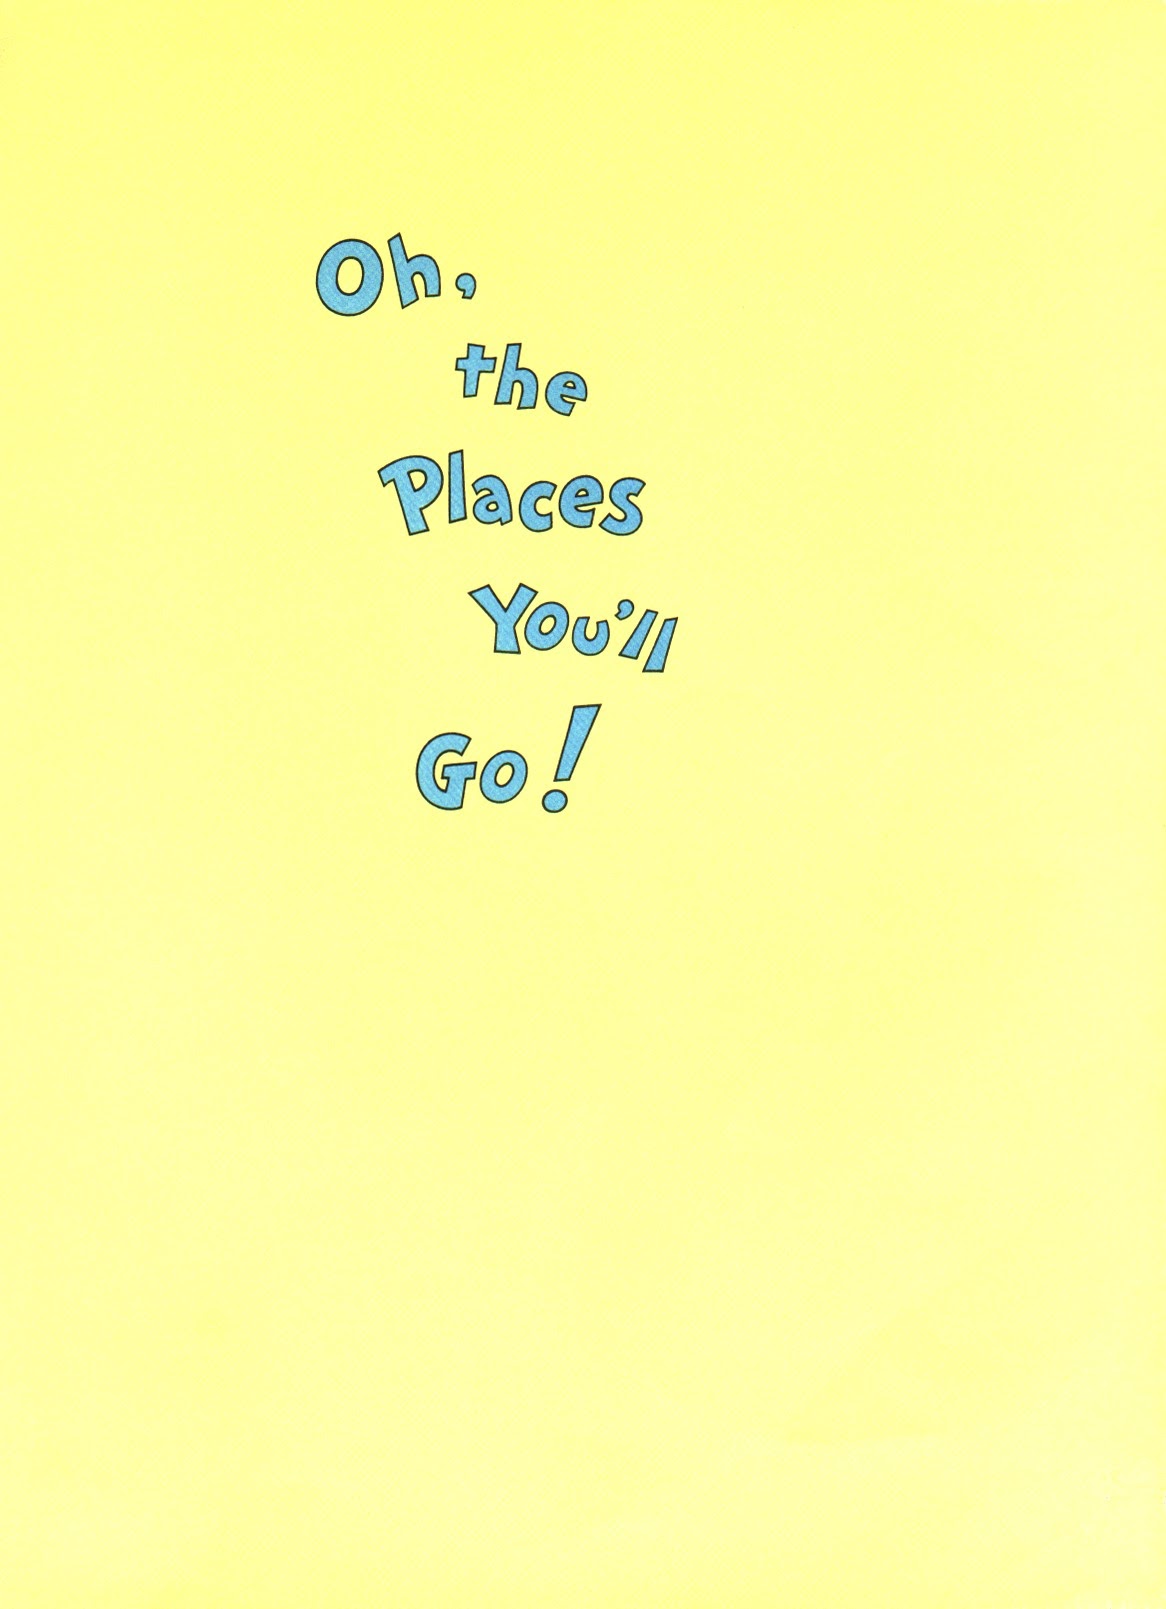 Read online Oh, the Places You'll Go! comic -  Issue # Full - 3